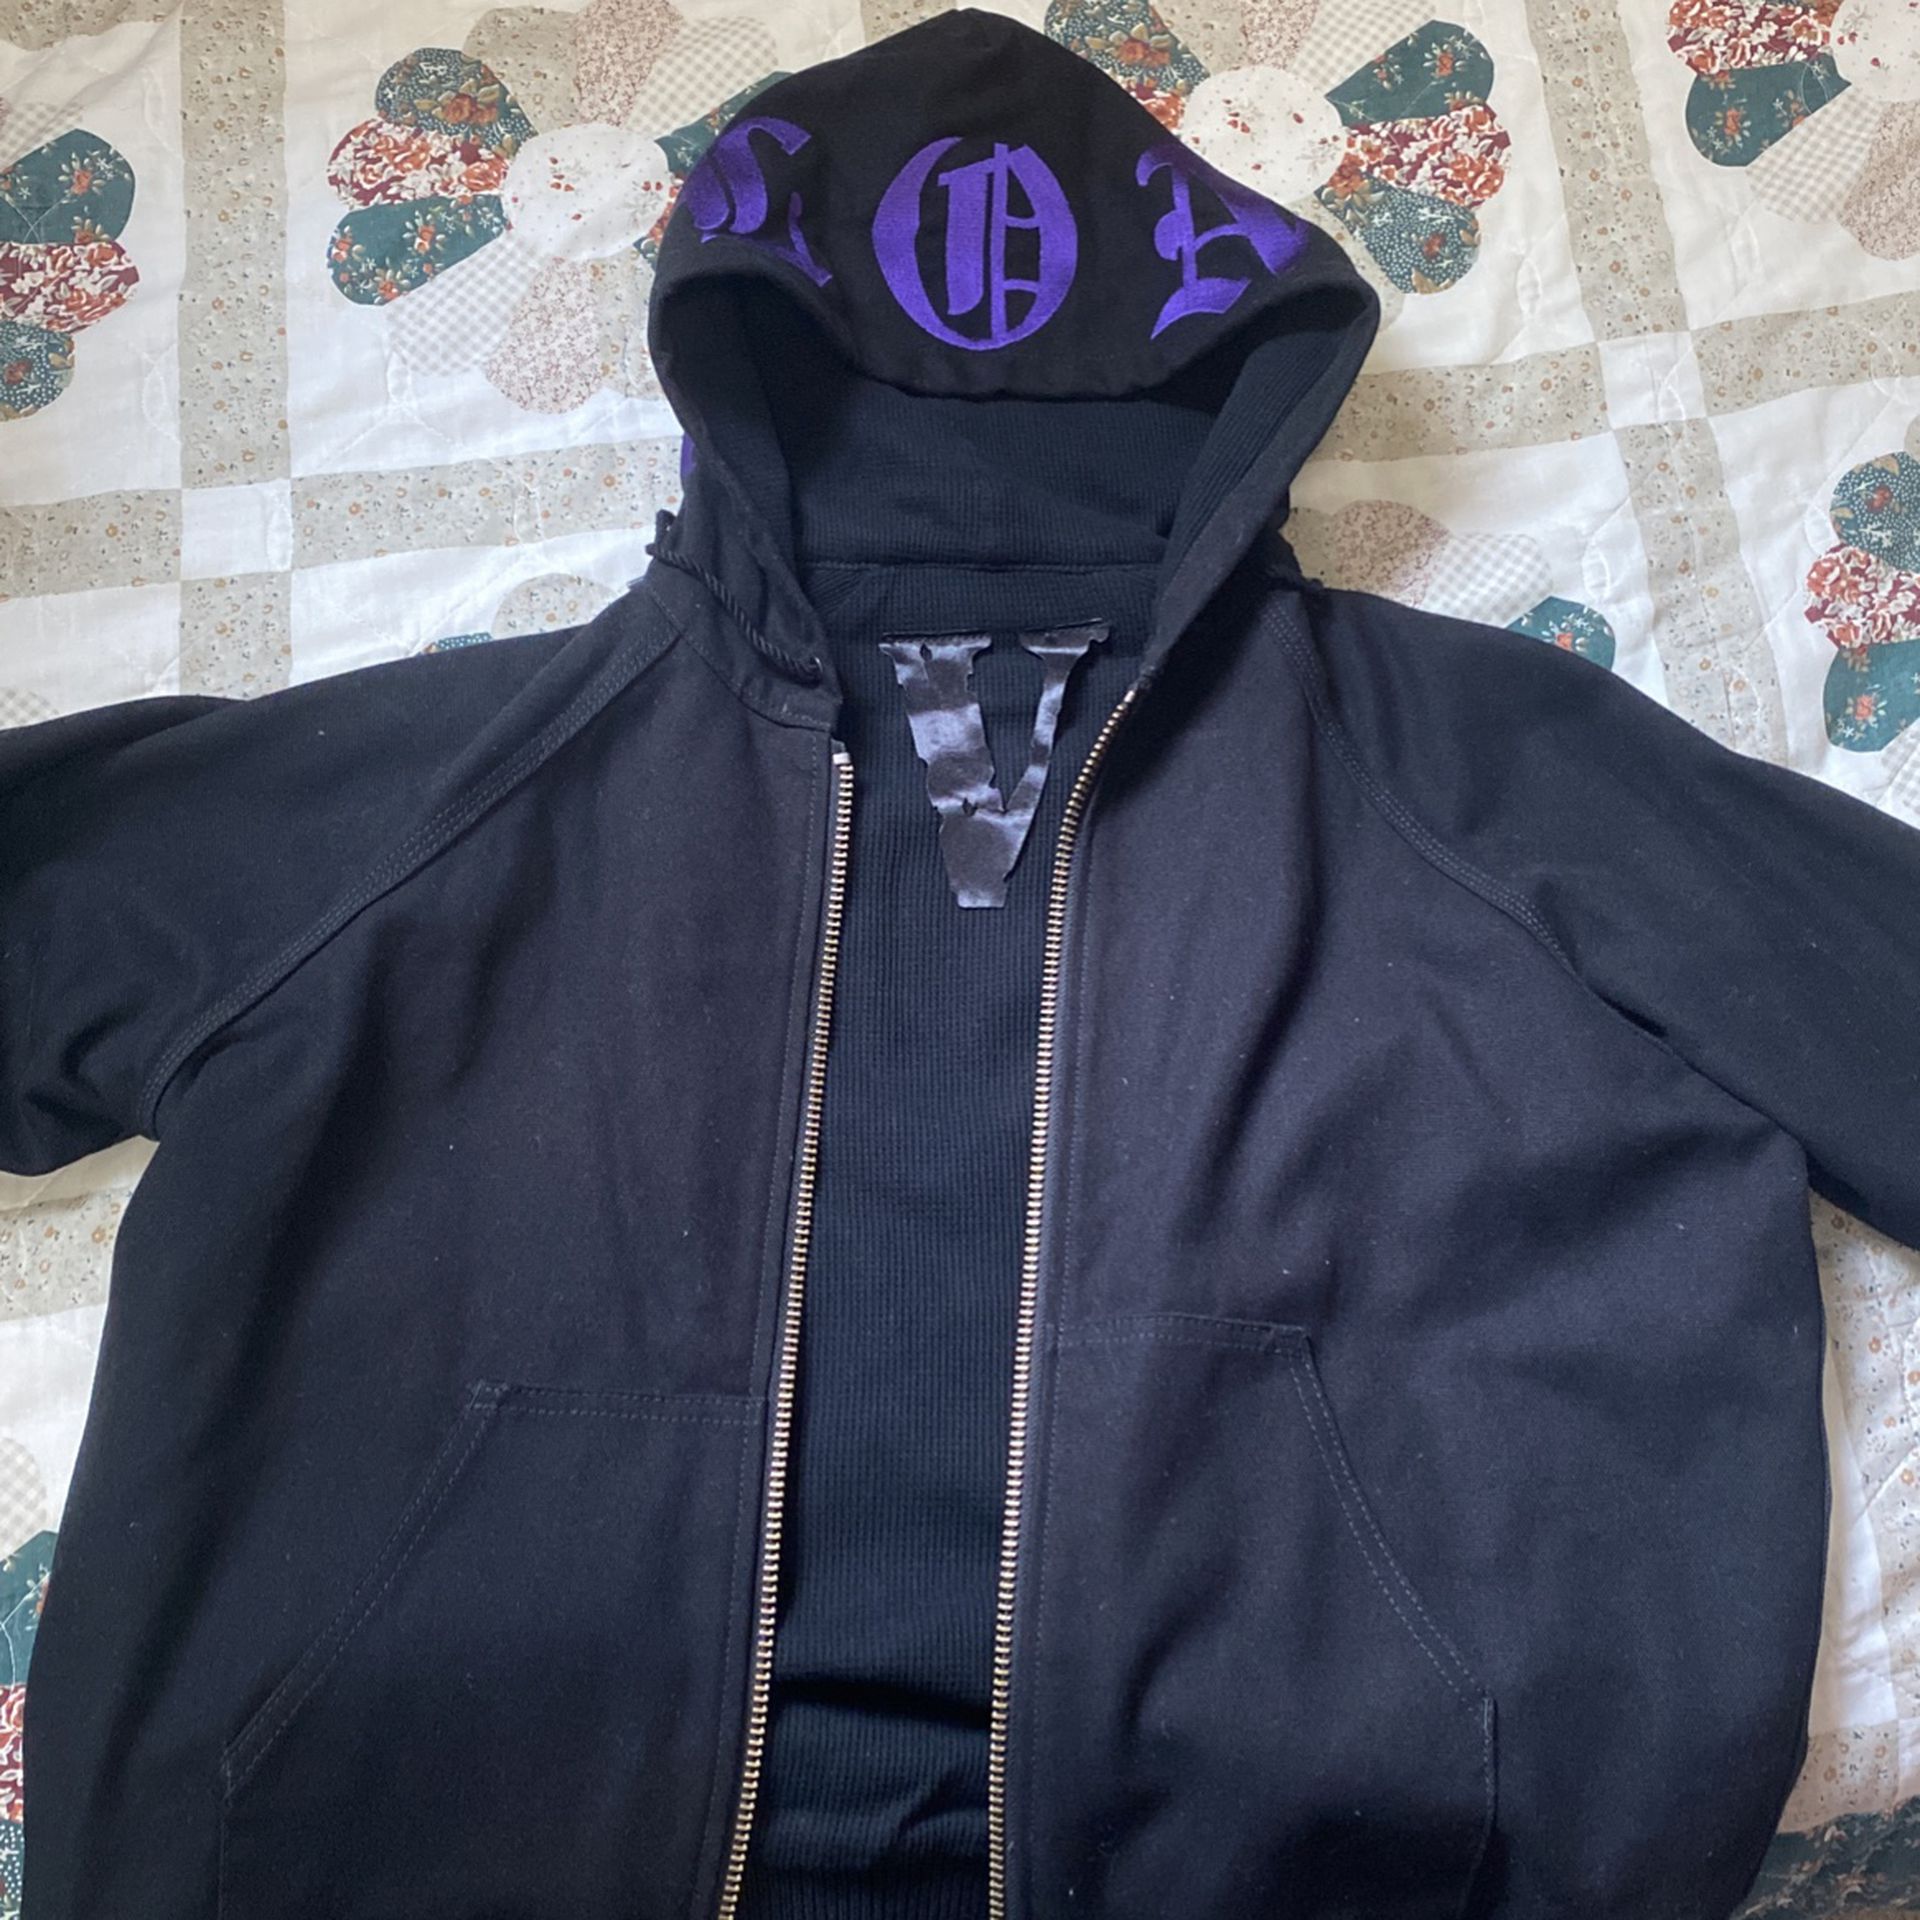 VLONE! Limited Edition VLONE Jacket, Size M for Sale in Berkeley